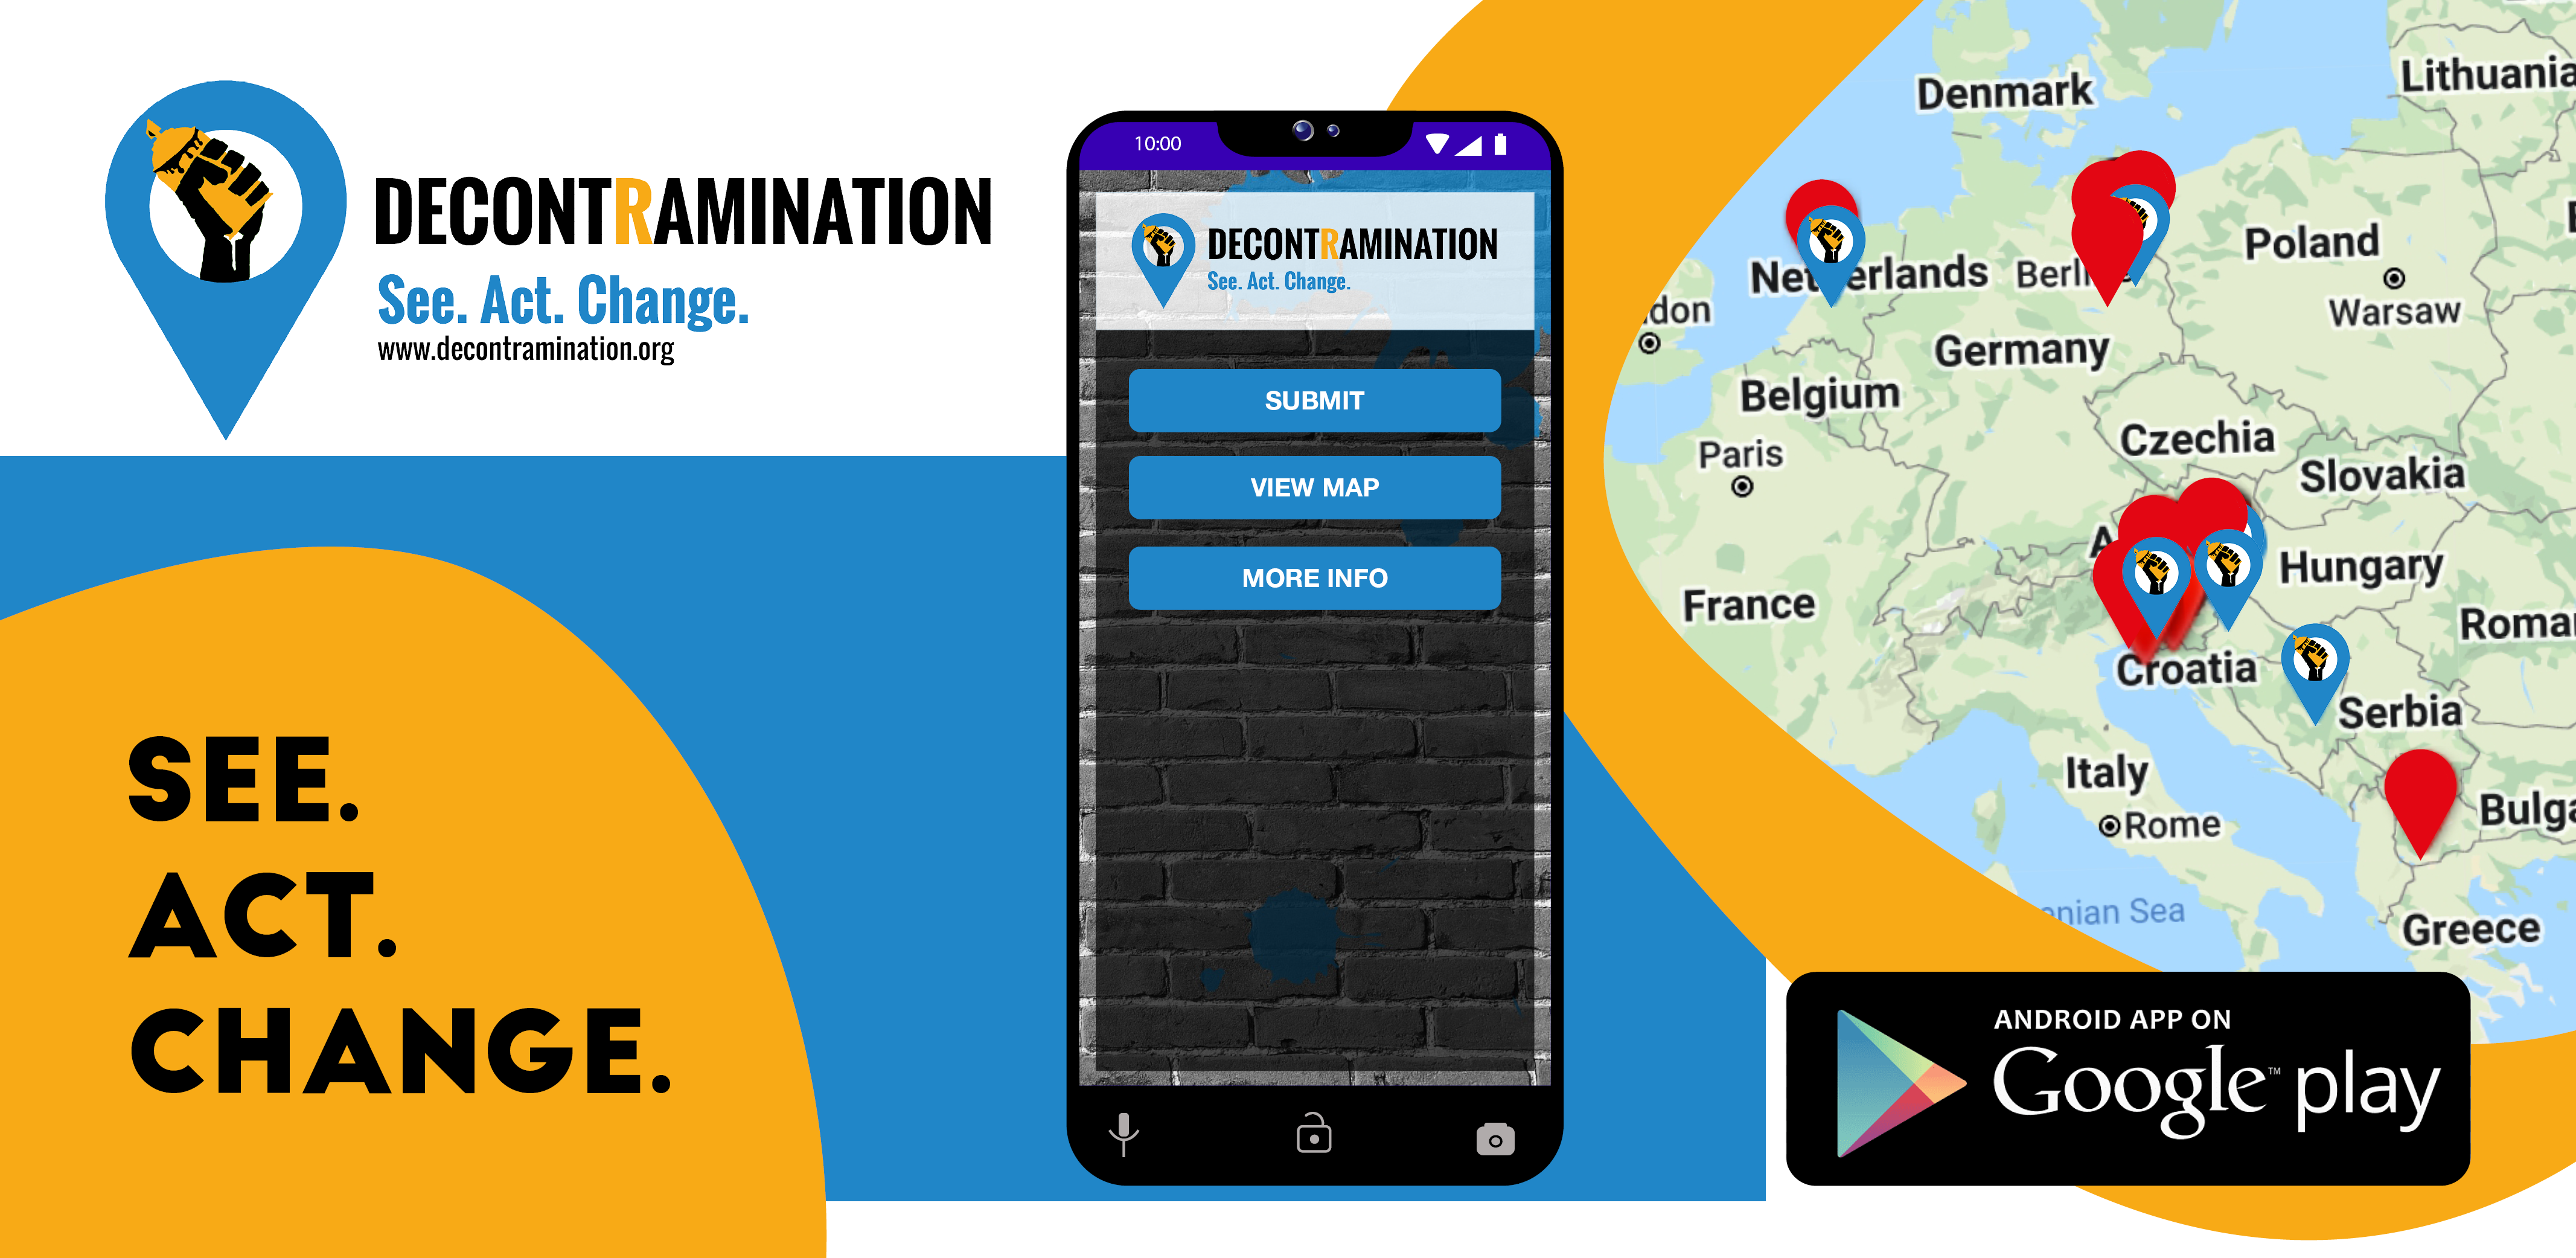 Introducing DecontRamination mobile app to track hate speech in the public spaces